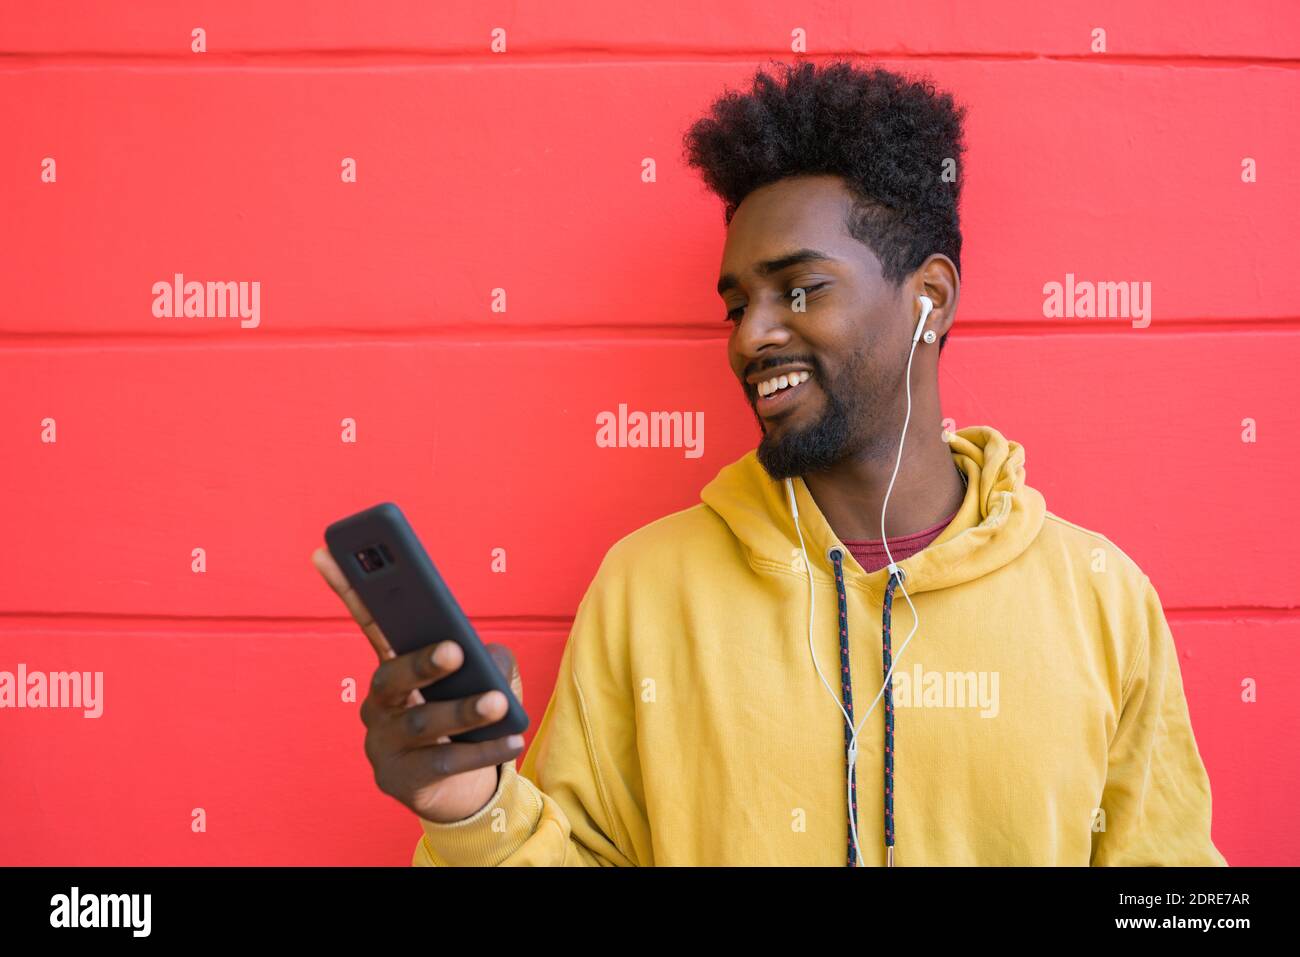 Afro man using his mobile phone. Stock Photo